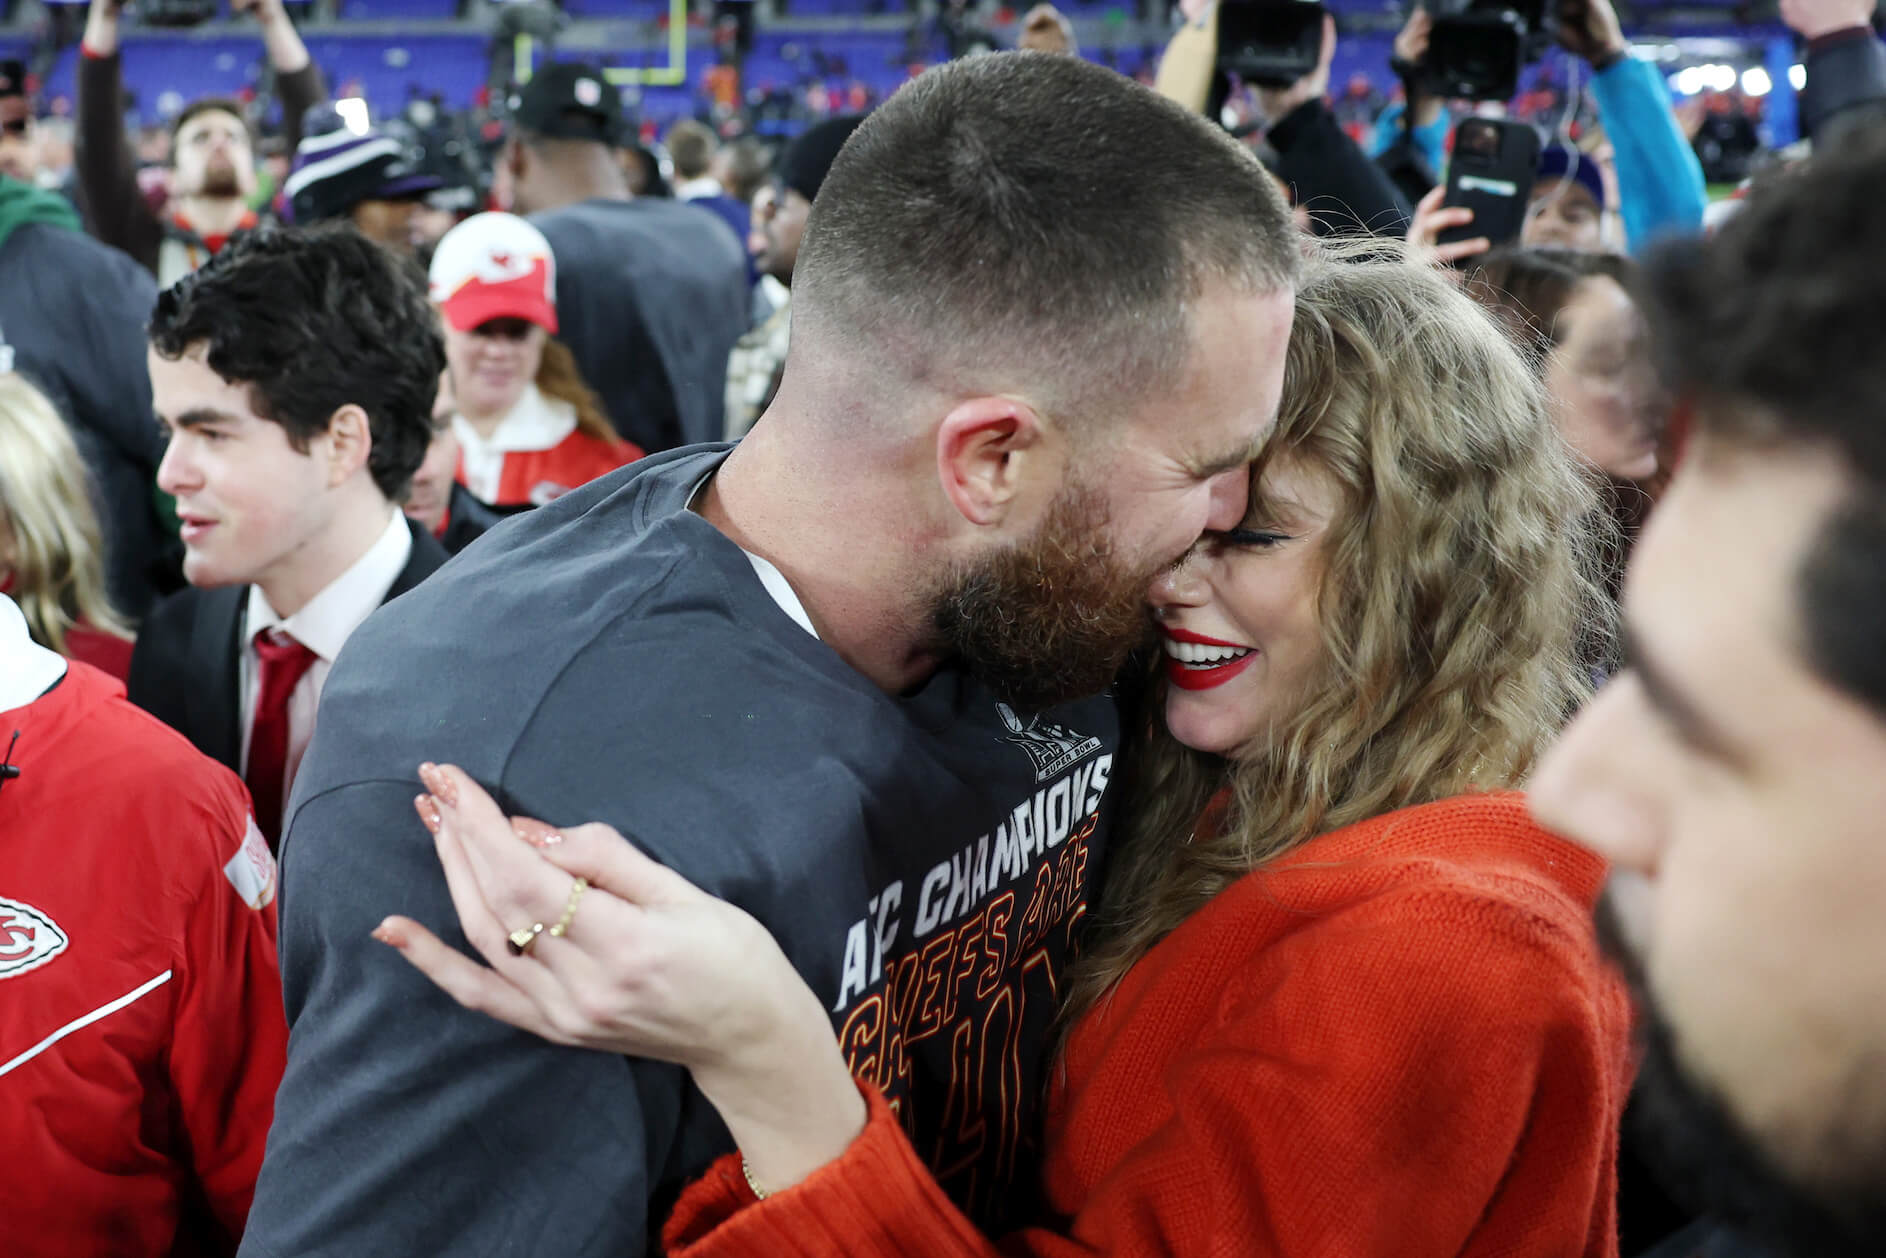 Travis Kelce tightly hugging Taylor Swift among a crowd oe people after a Kansas City Chiefs football game